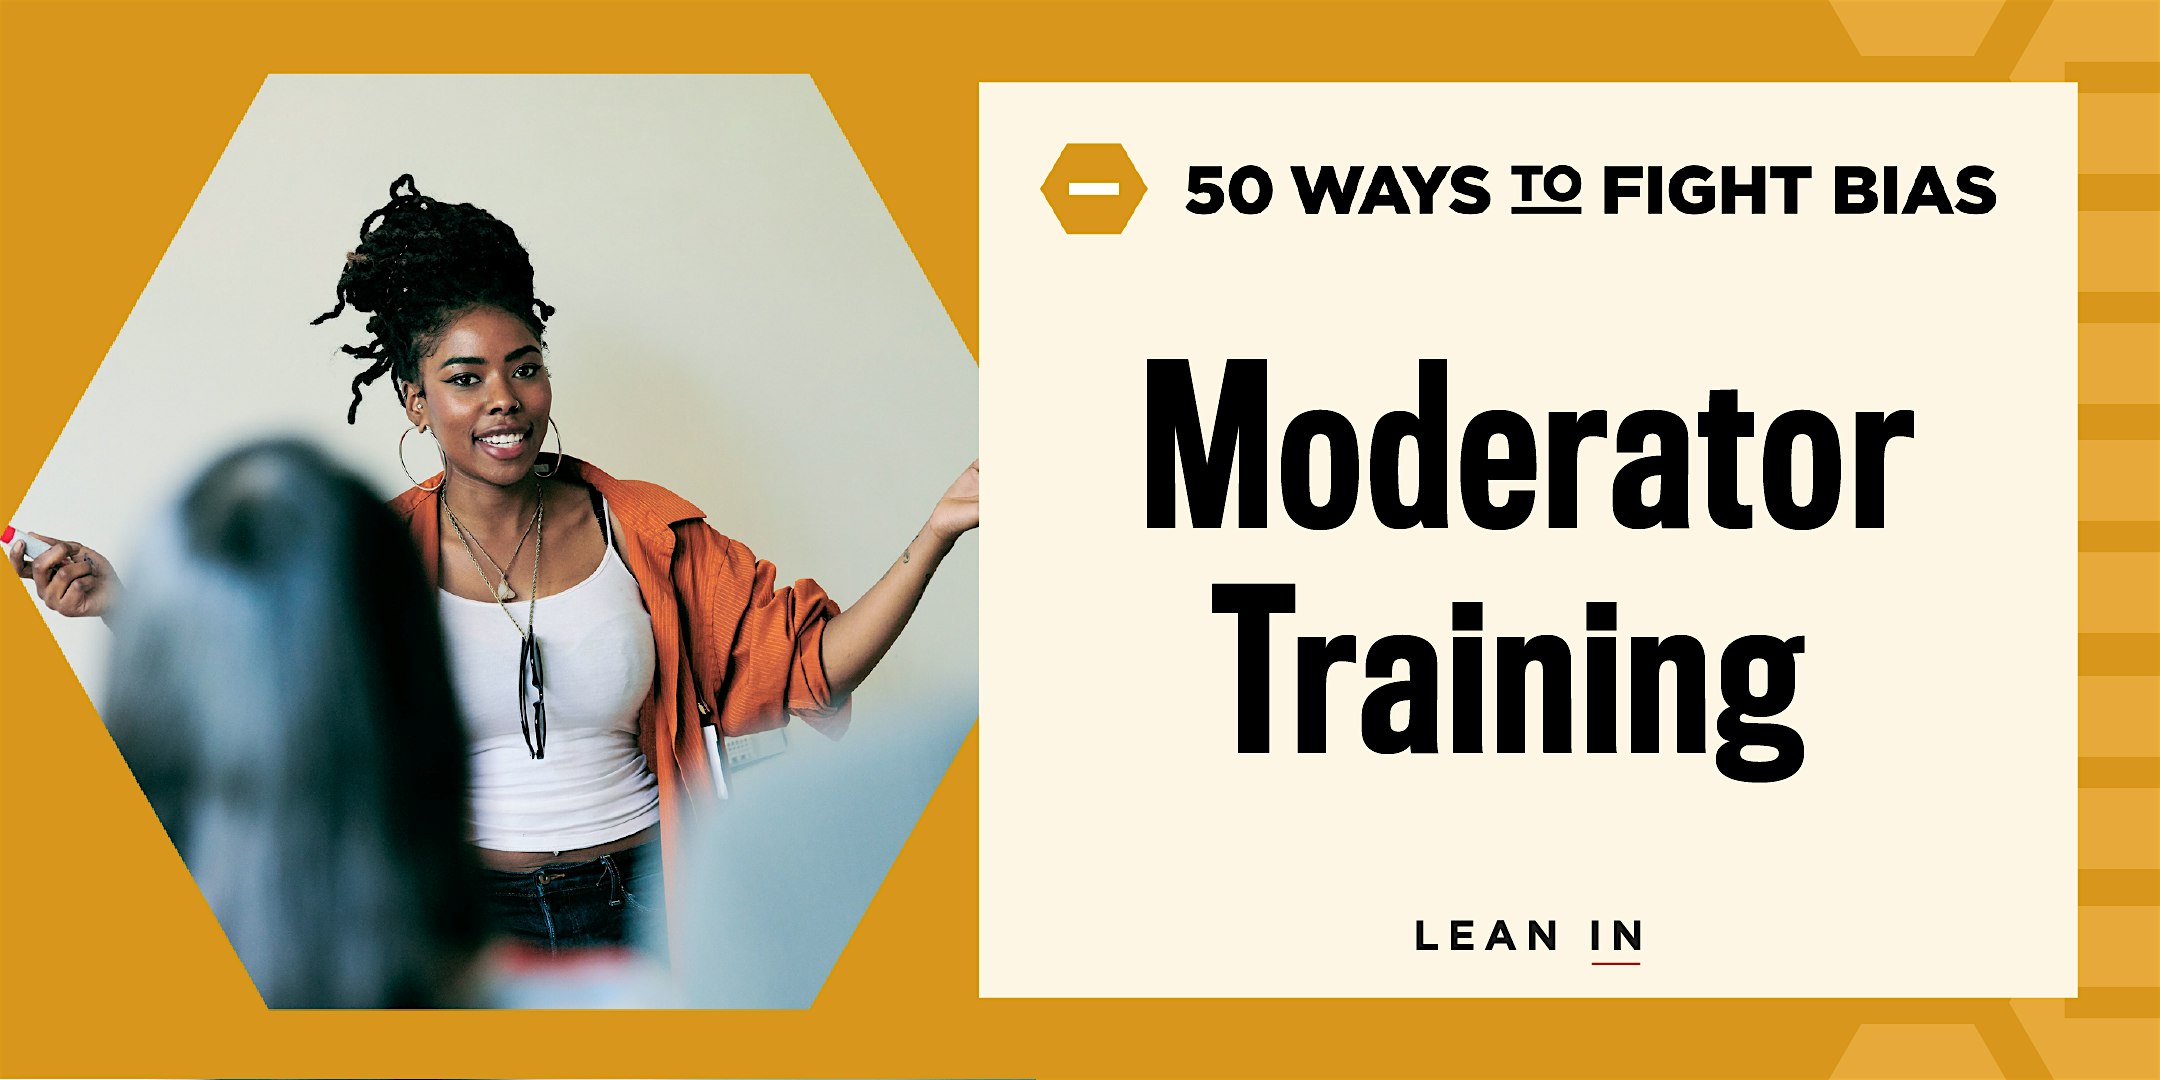 Join our next 50 Ways to Fight Bias: Moderator Training event